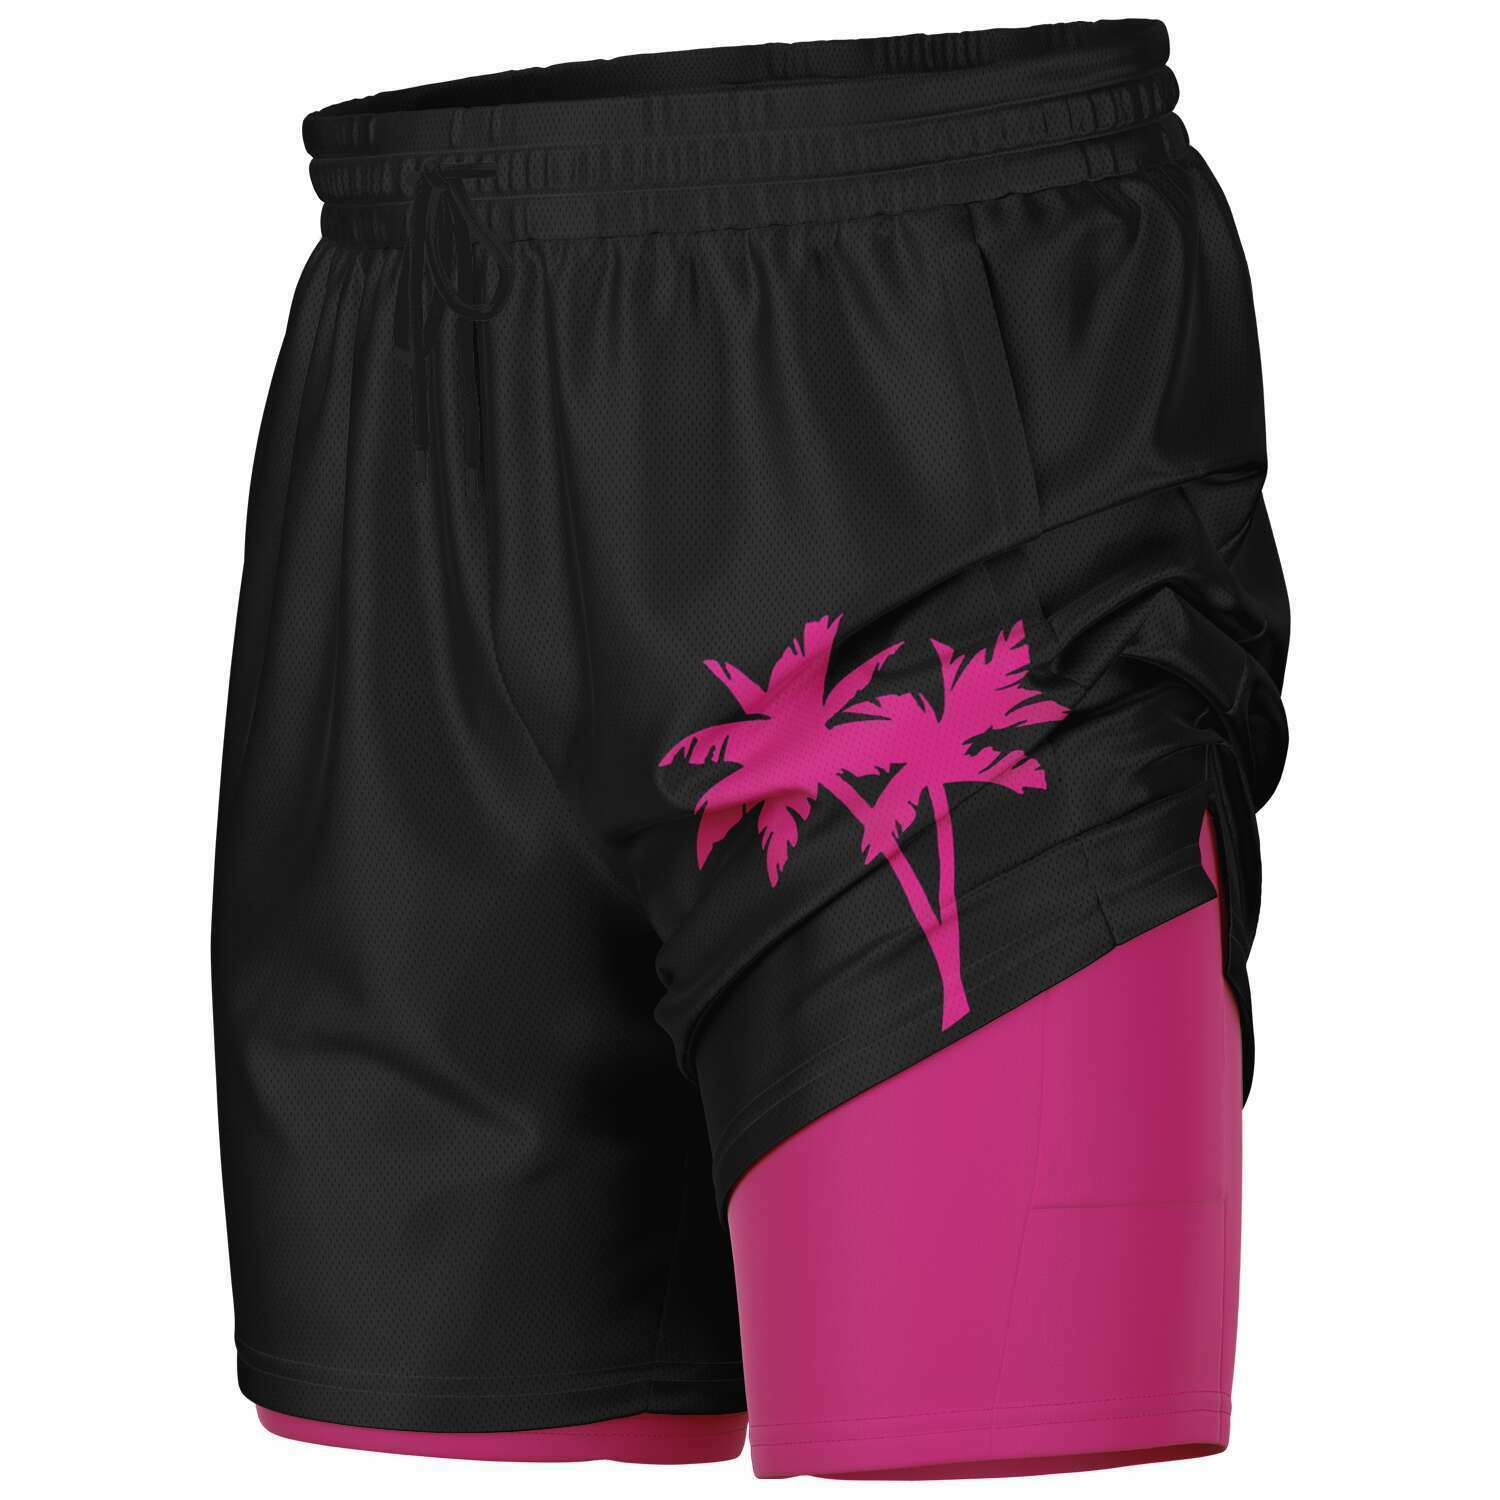 Rad Palm Pink Palm Men's 2-in-1 Shorts